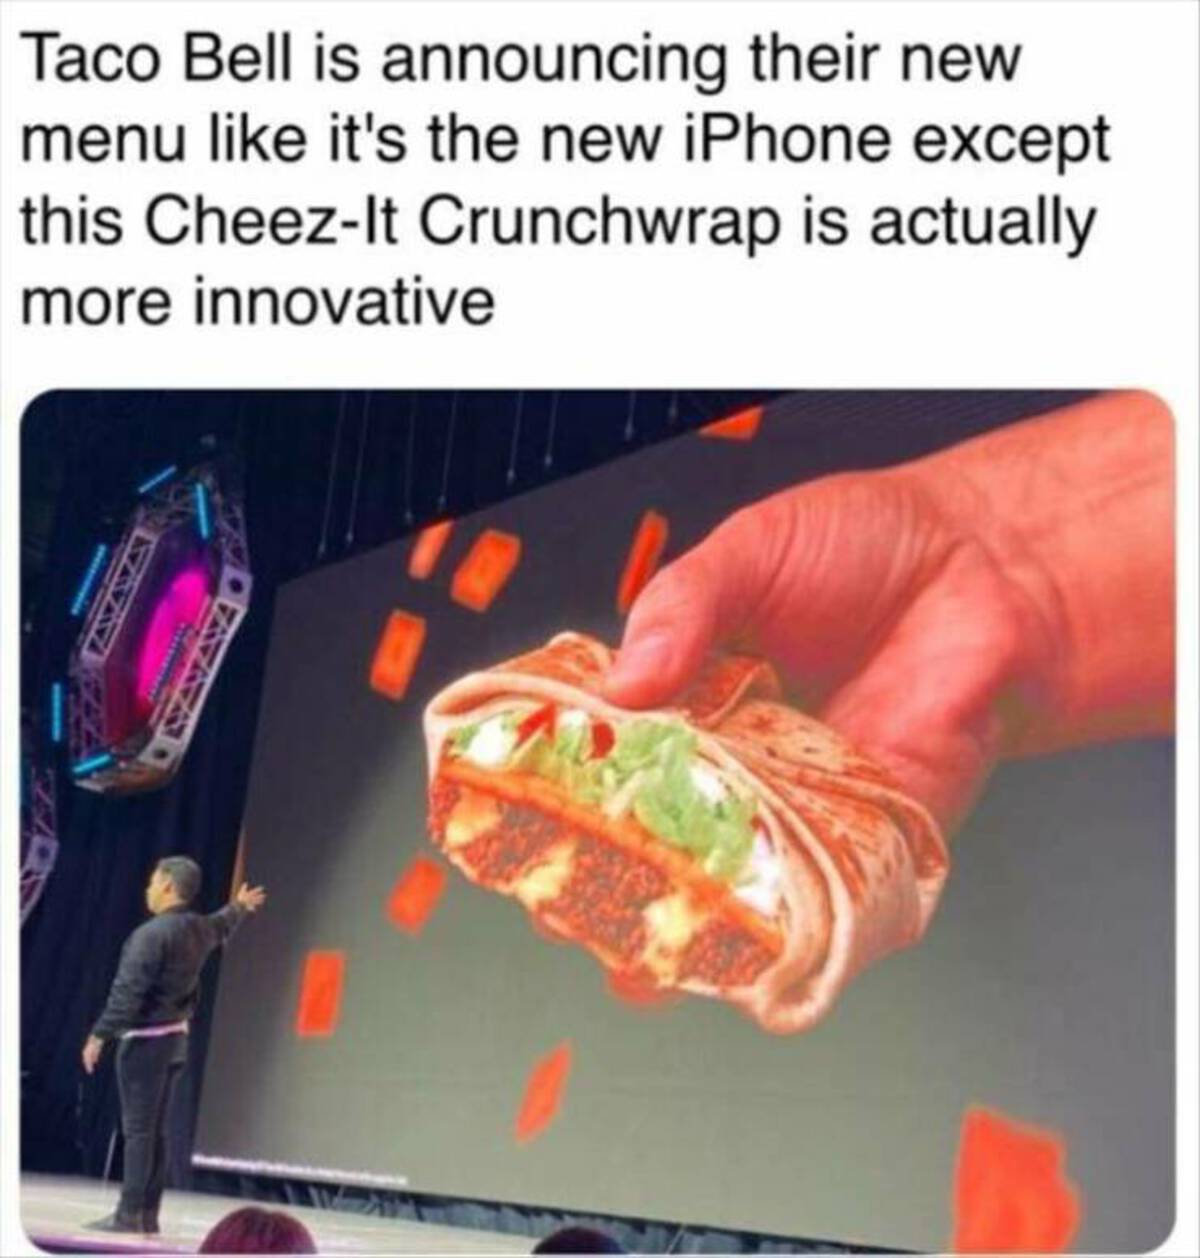 taco bell cheez it crunchwrap 2024 - Taco Bell is announcing their new menu it's the new iPhone except this CheezIt Crunchwrap is actually more innovative Kazaz Navazo L